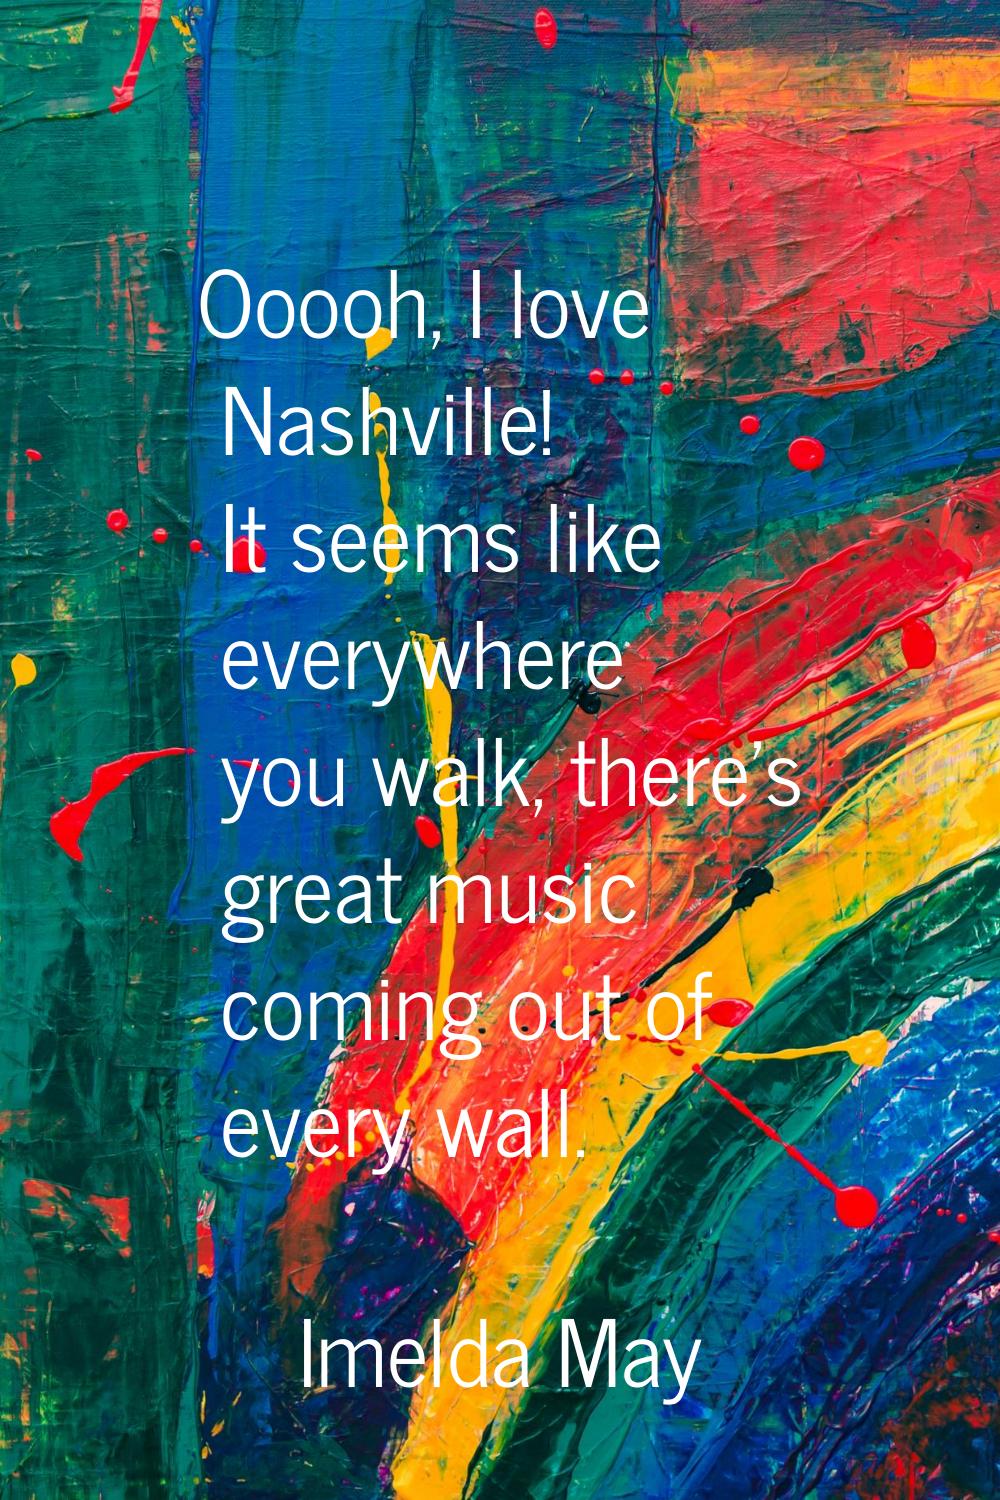 Ooooh, I love Nashville! It seems like everywhere you walk, there's great music coming out of every